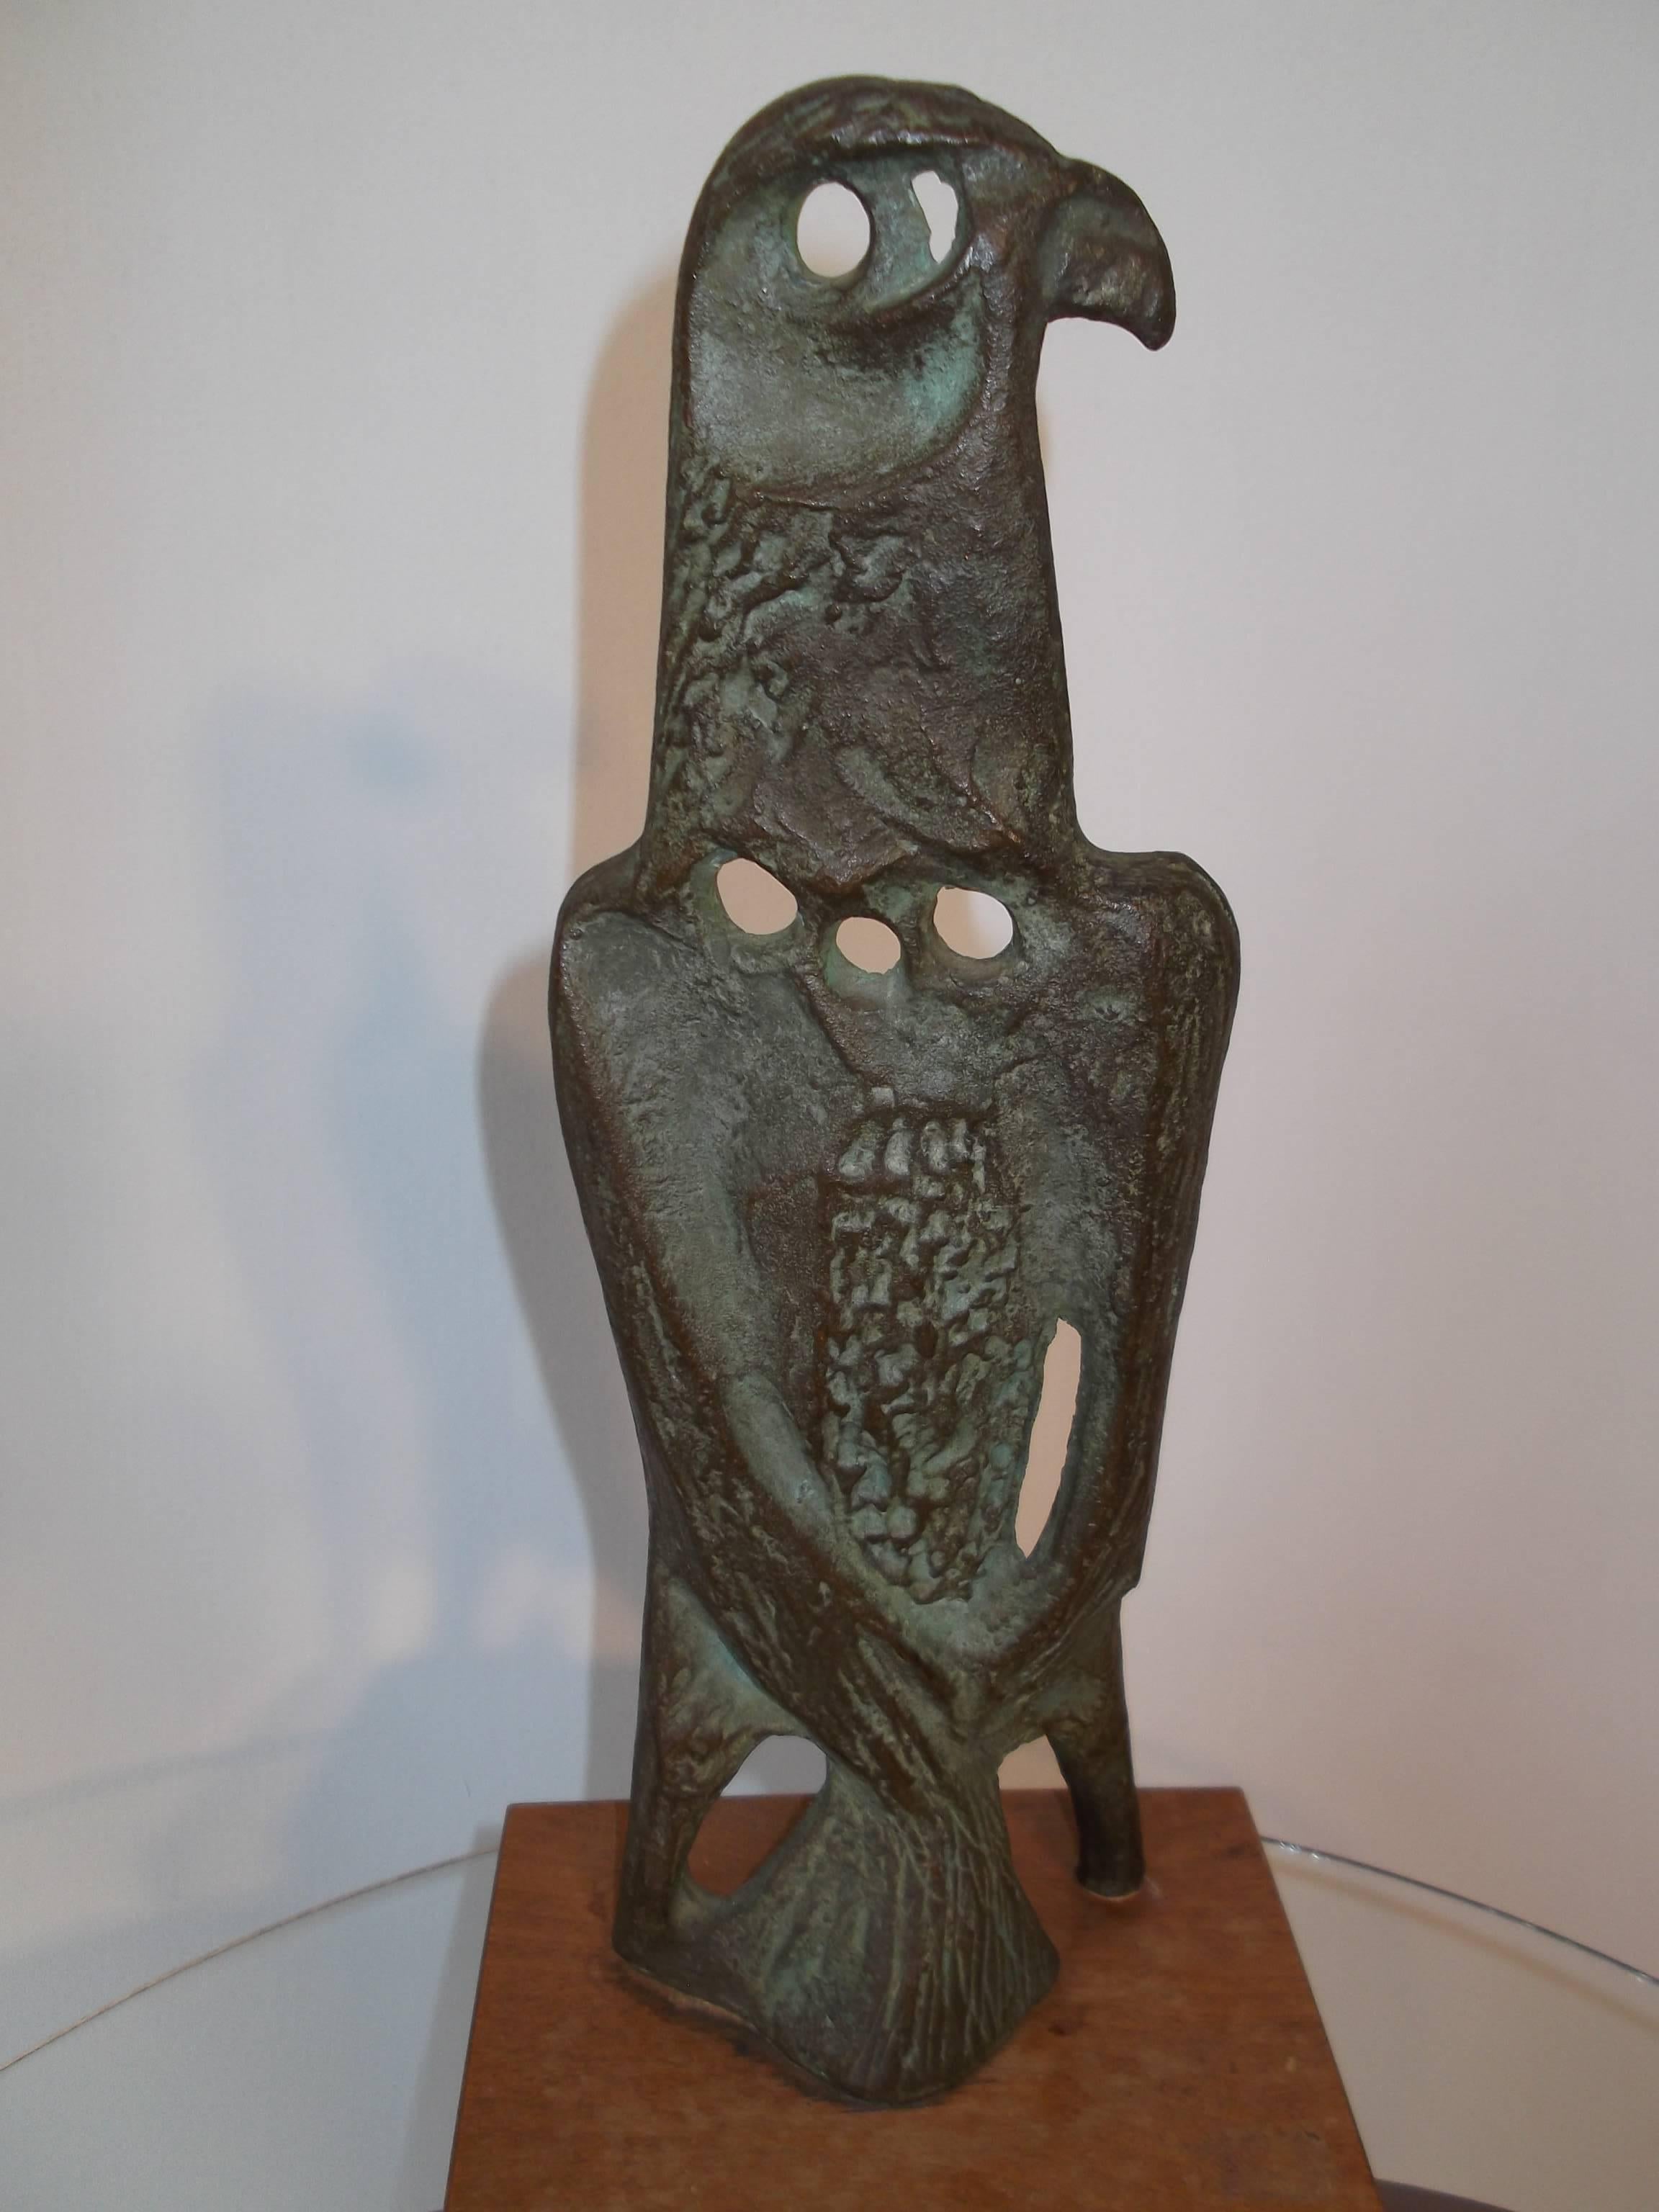 This is an vintage 1950s wonderfully cast bronze sculpture of a falcon or eagle. It is in abstract form, so you be the judge. It has reticulated areas throughout giving it depth, and detail. It is signed by artist Klein to back of wood base in pen.